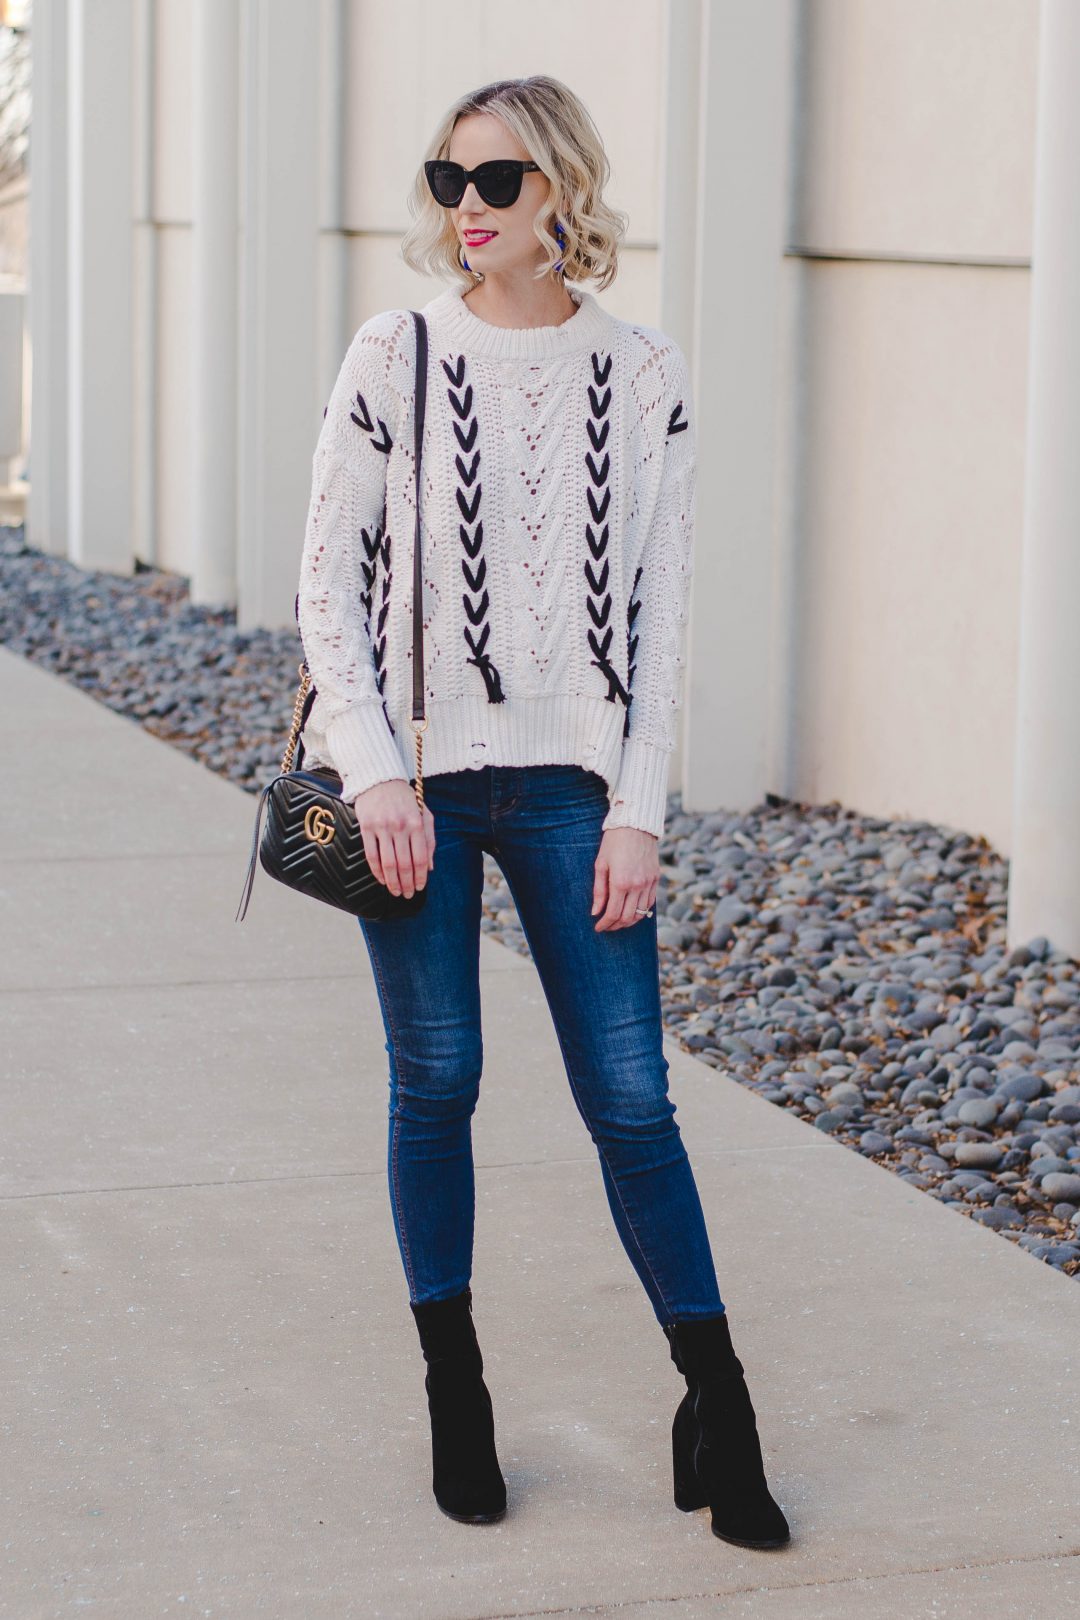 Lace-Up Sweater for Spring - Straight A Style